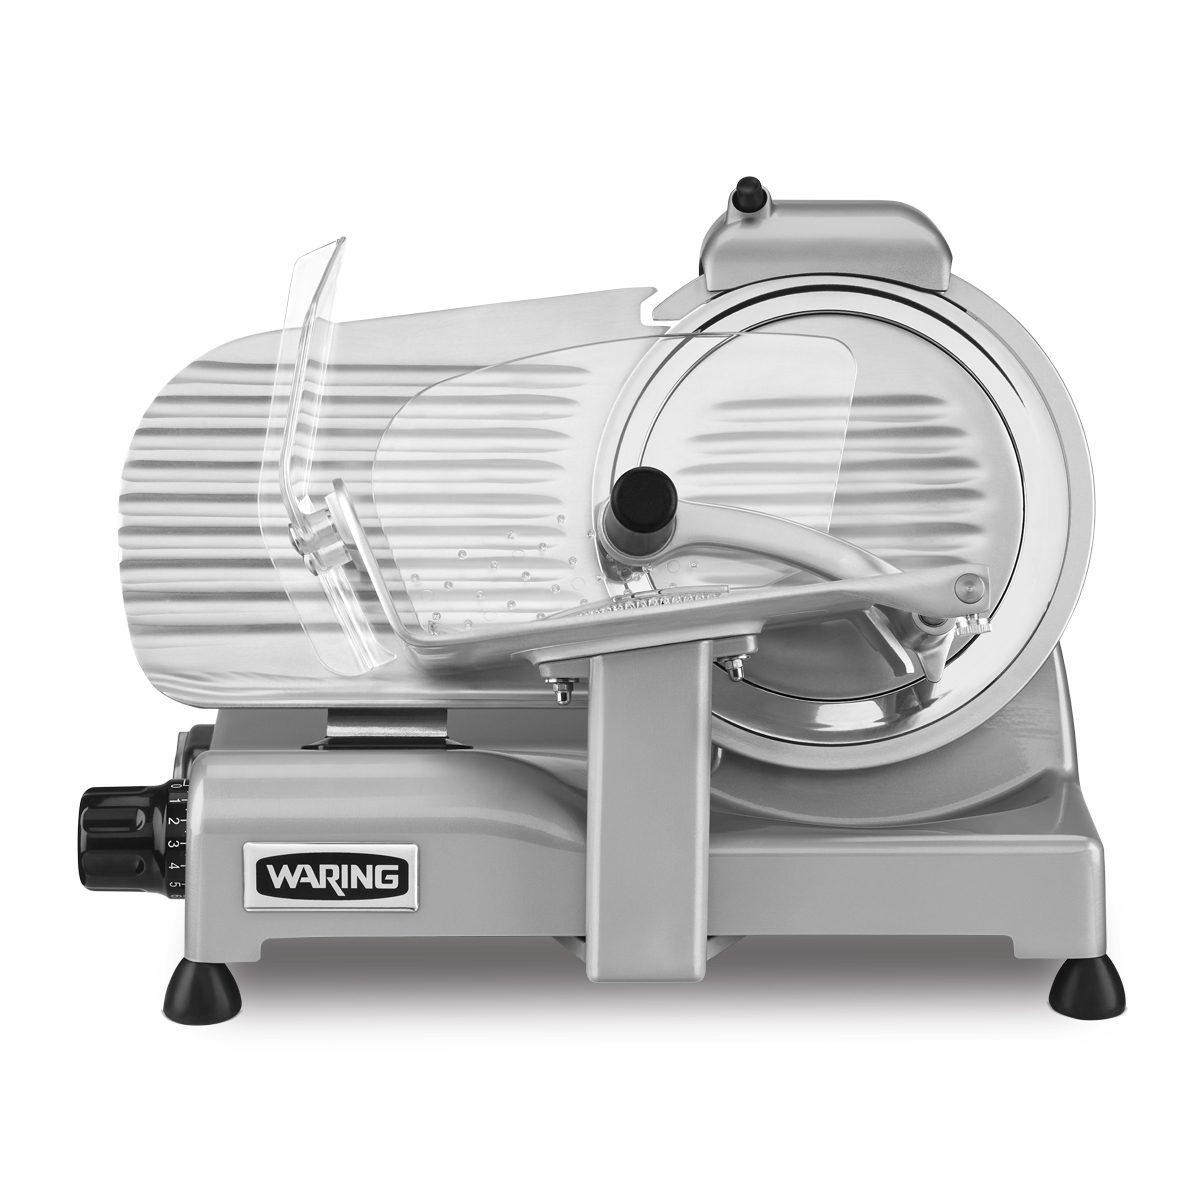 Waring Commercial 8.5” Professional Food Slicer, Silver